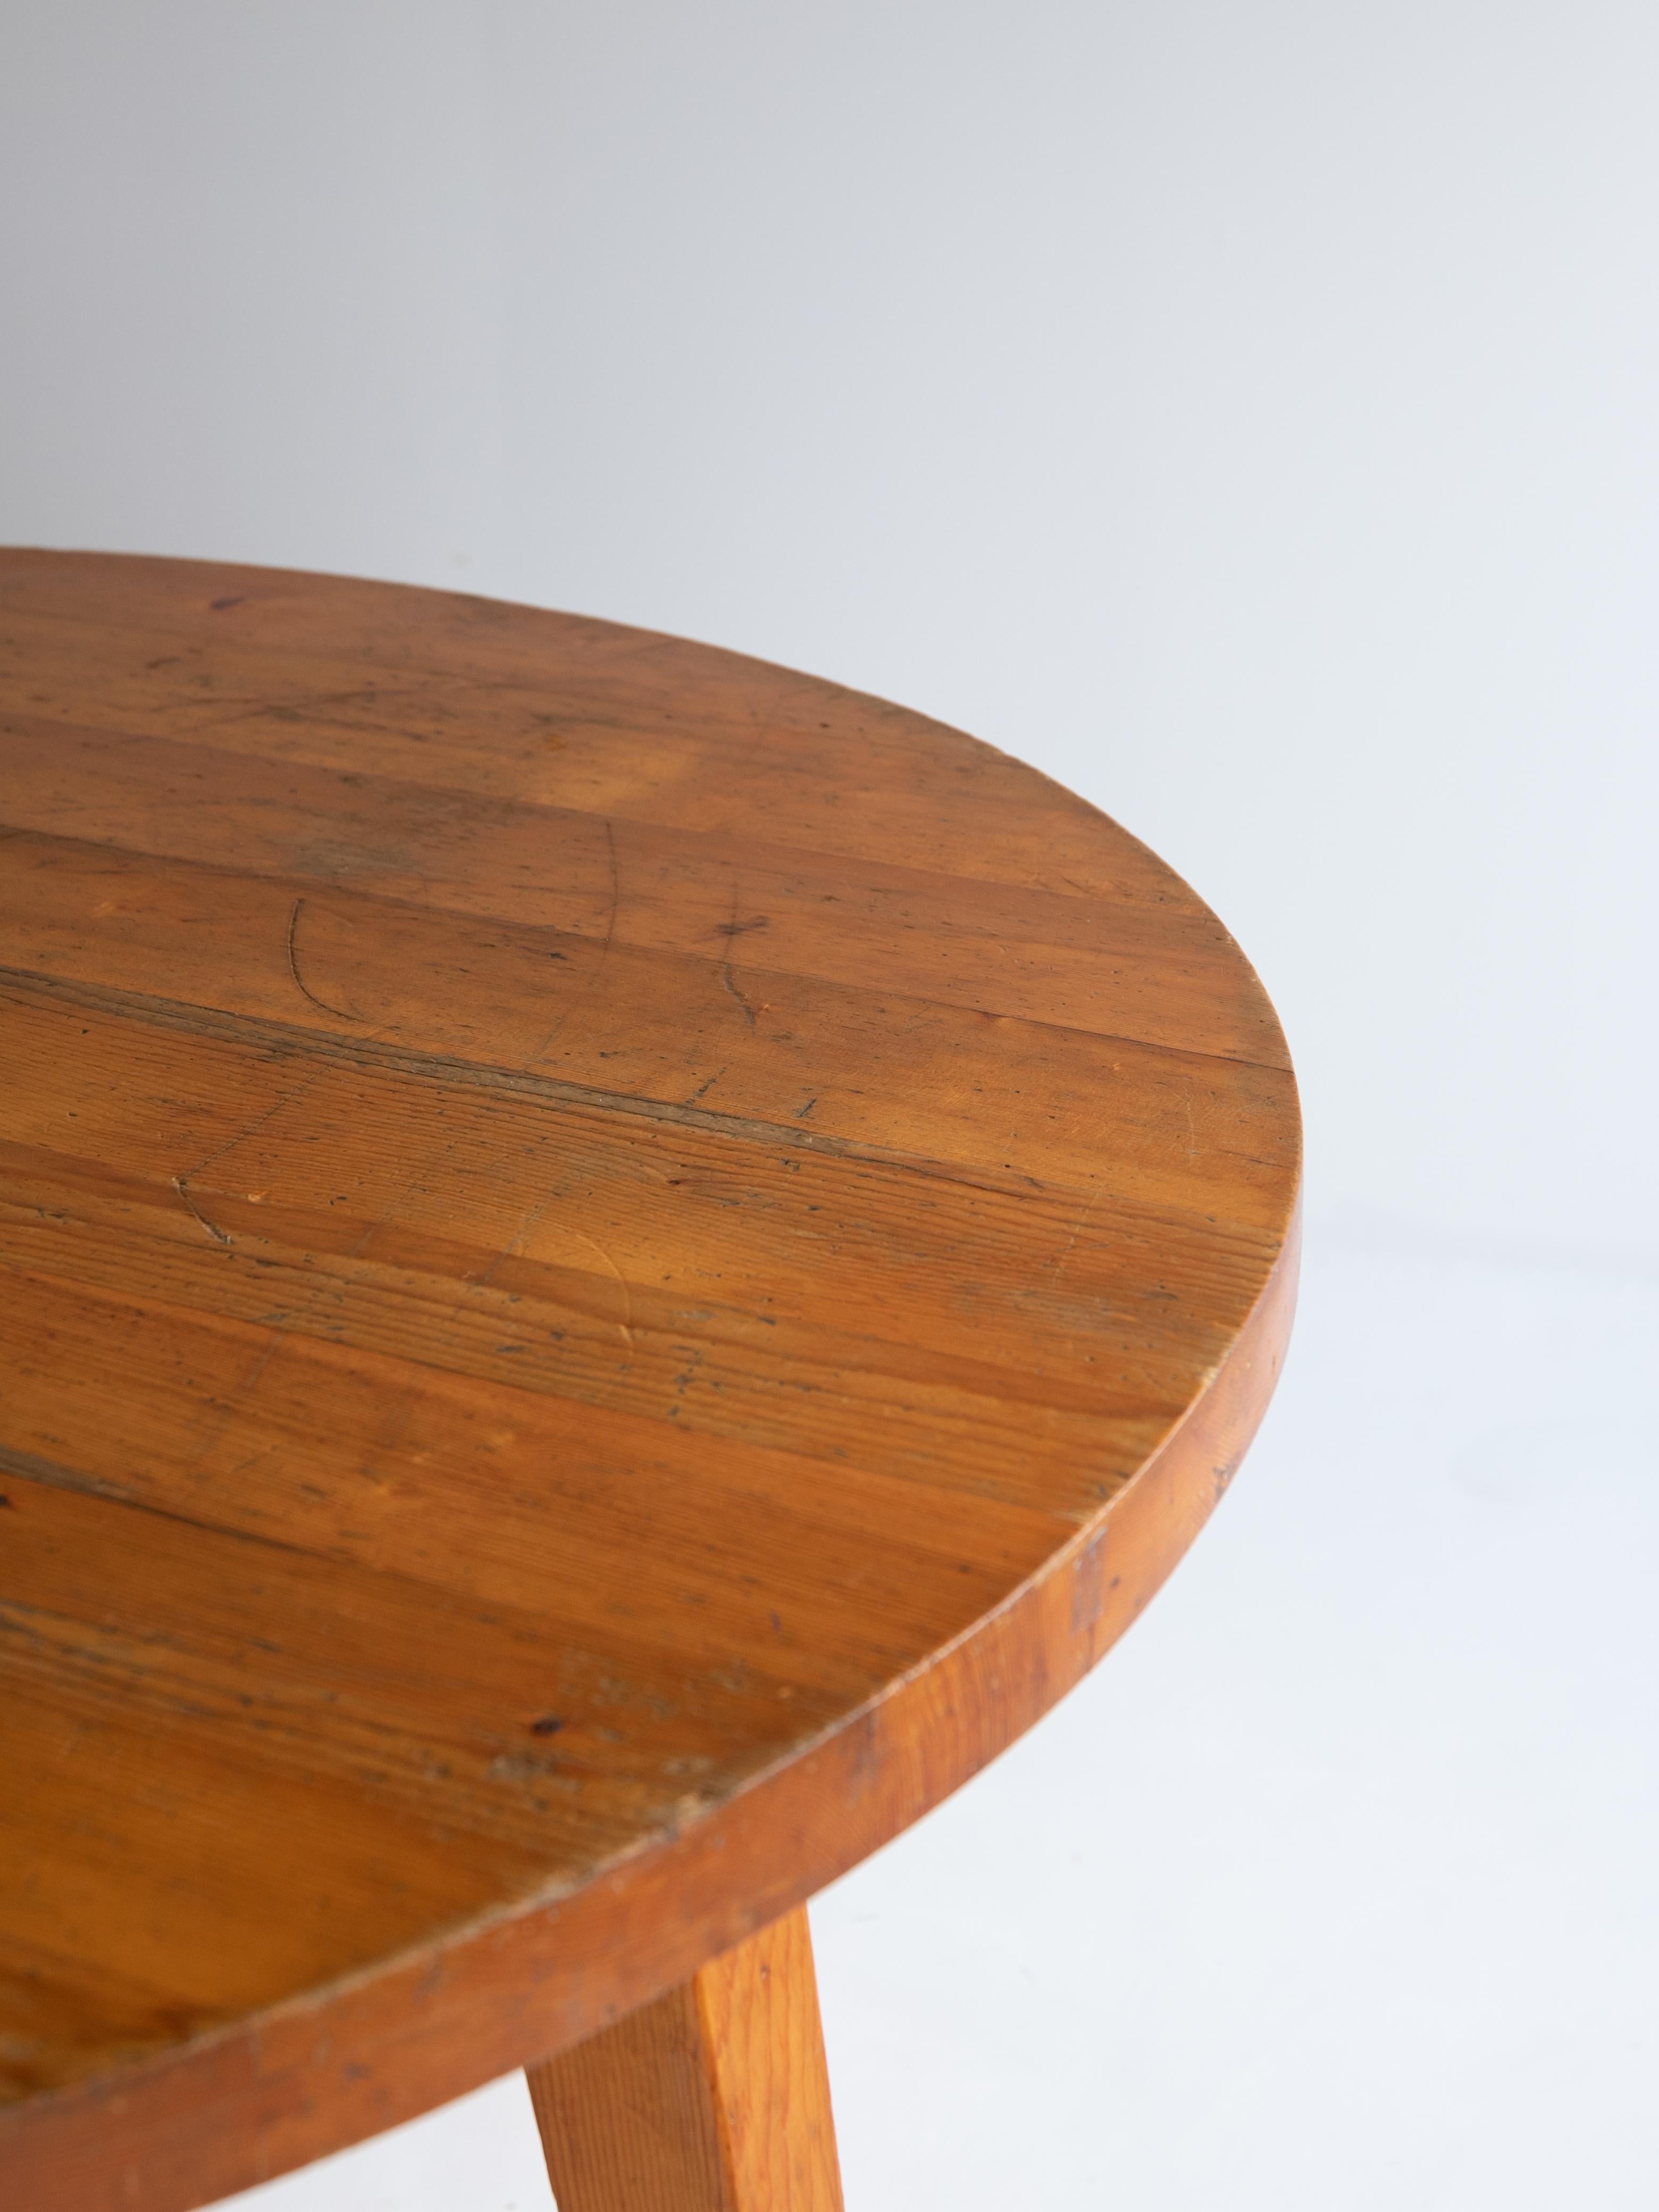 Vintage round table by Christian Durupt and Charlotte Perriand, 1968 For Sale 3